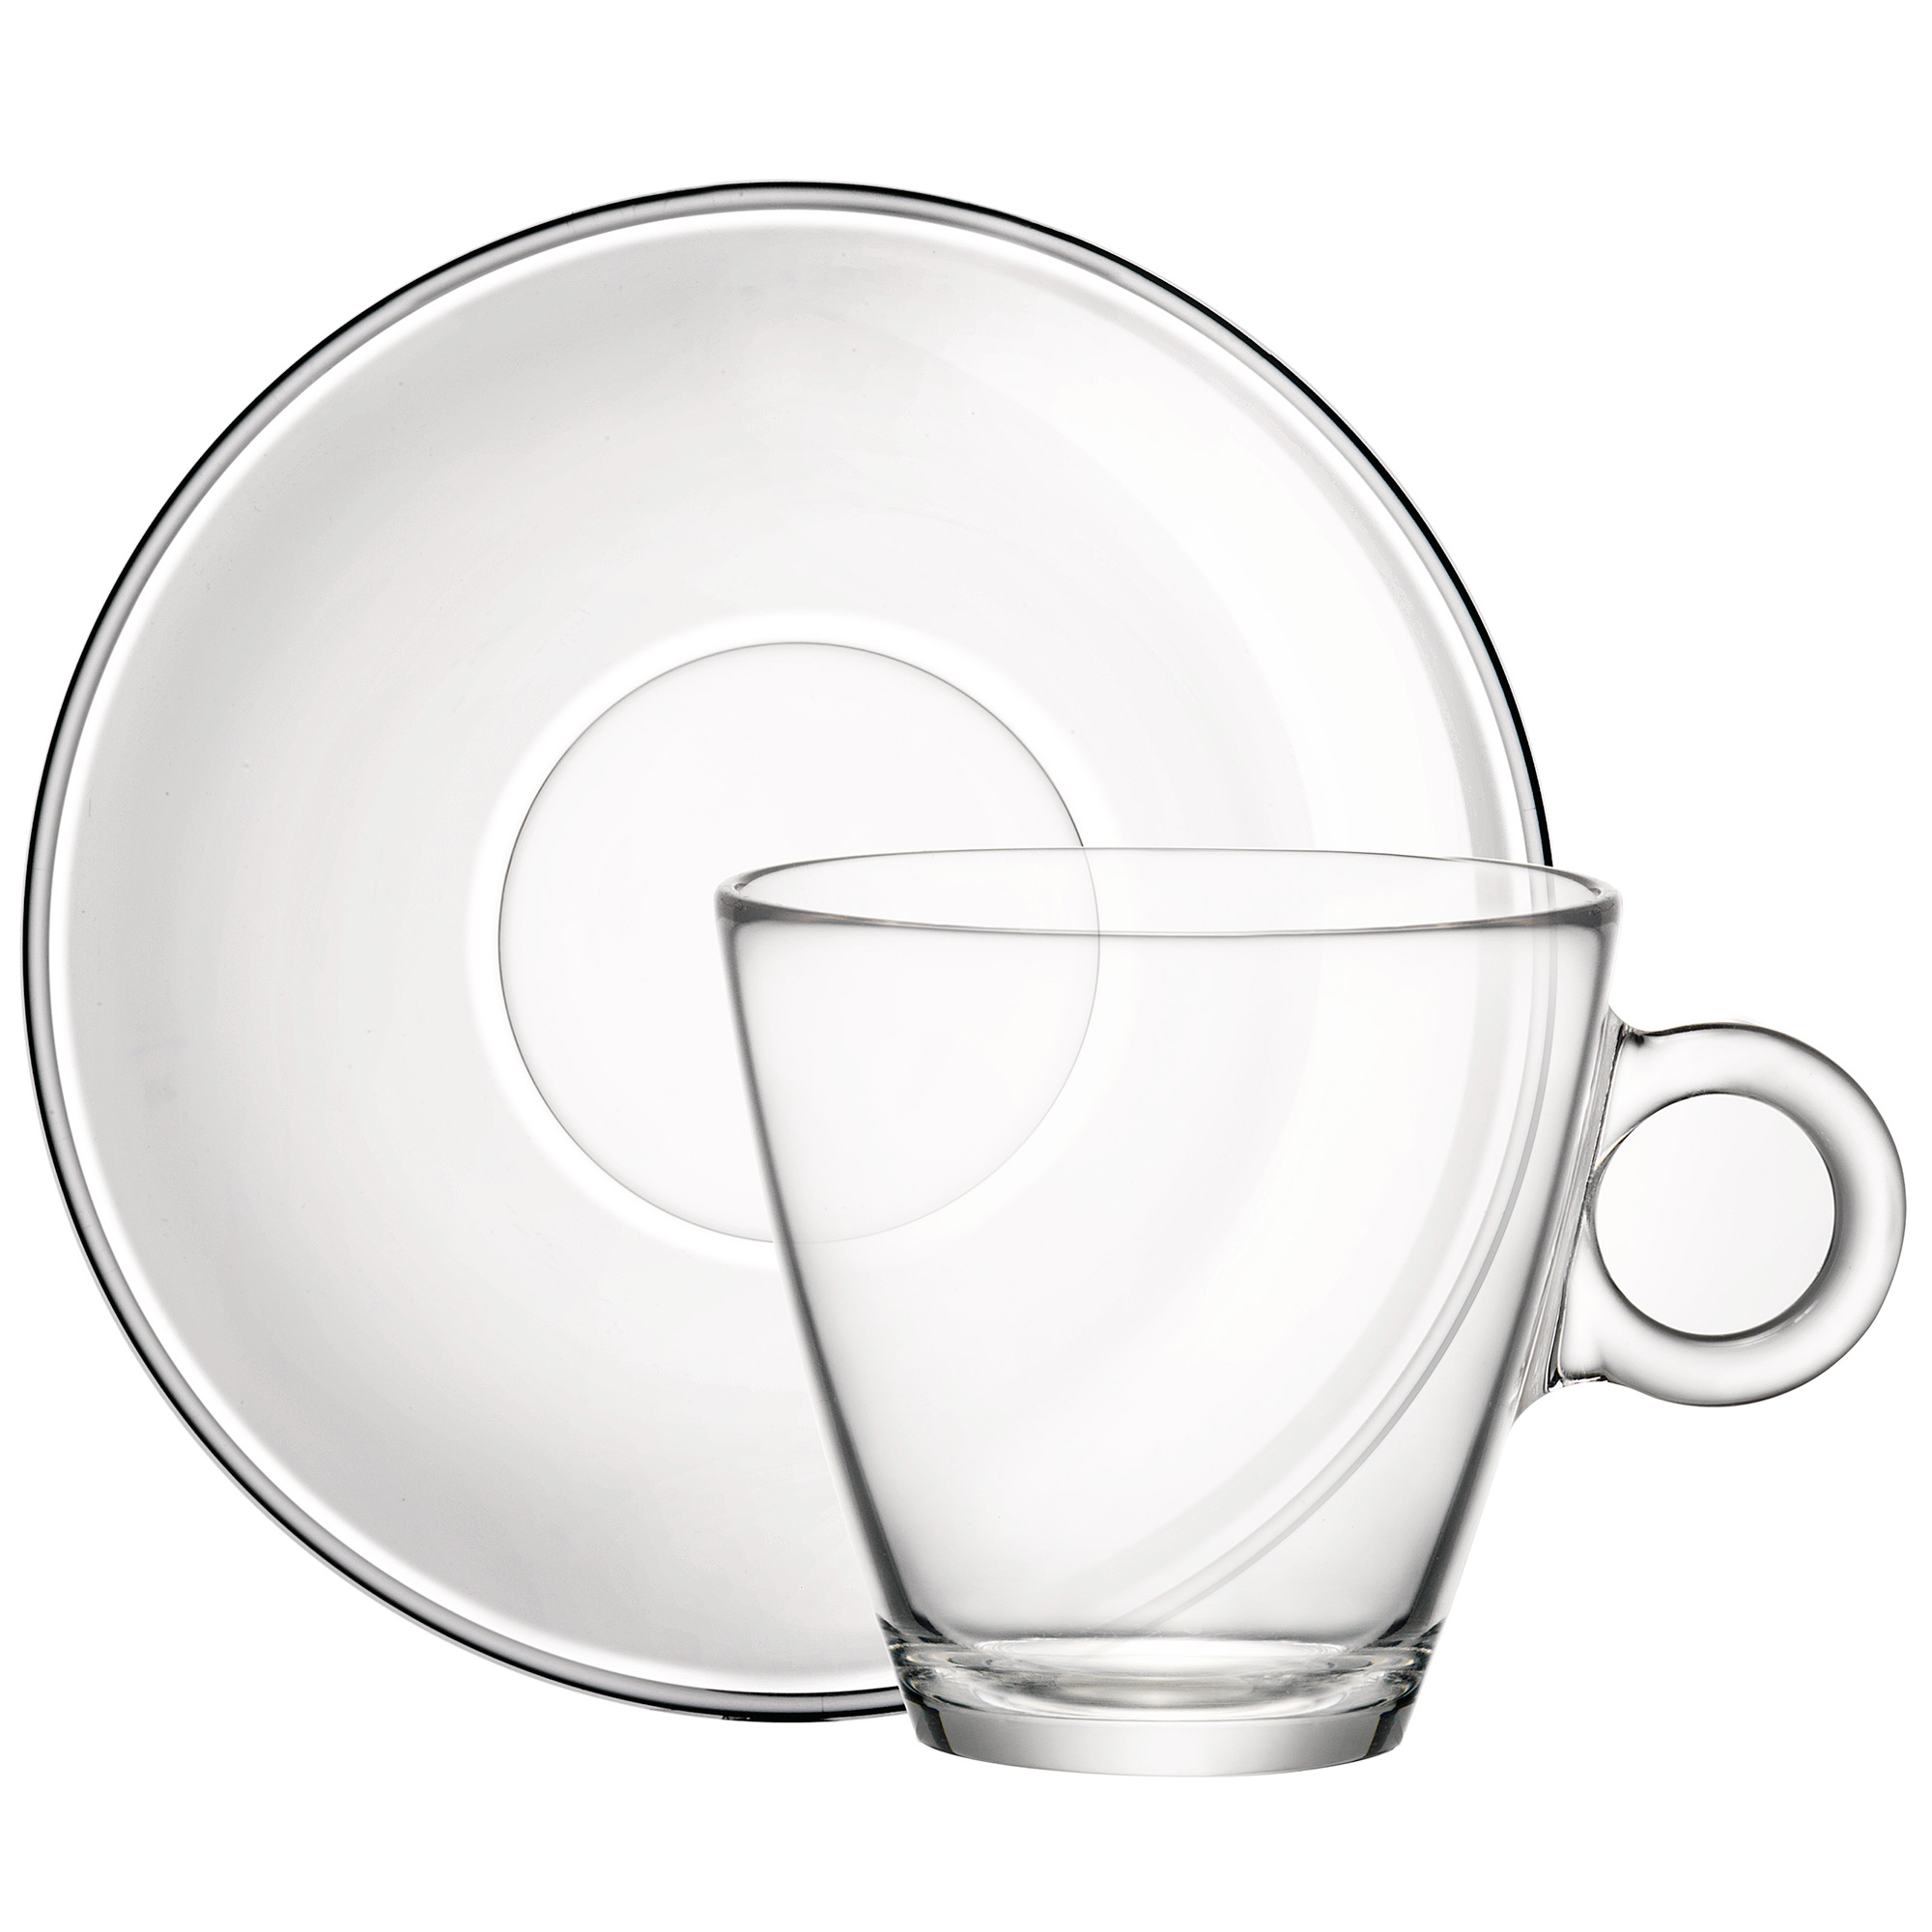 Easy Bar Glass Cappuccino Cups and Saucers 6oz / 170ml